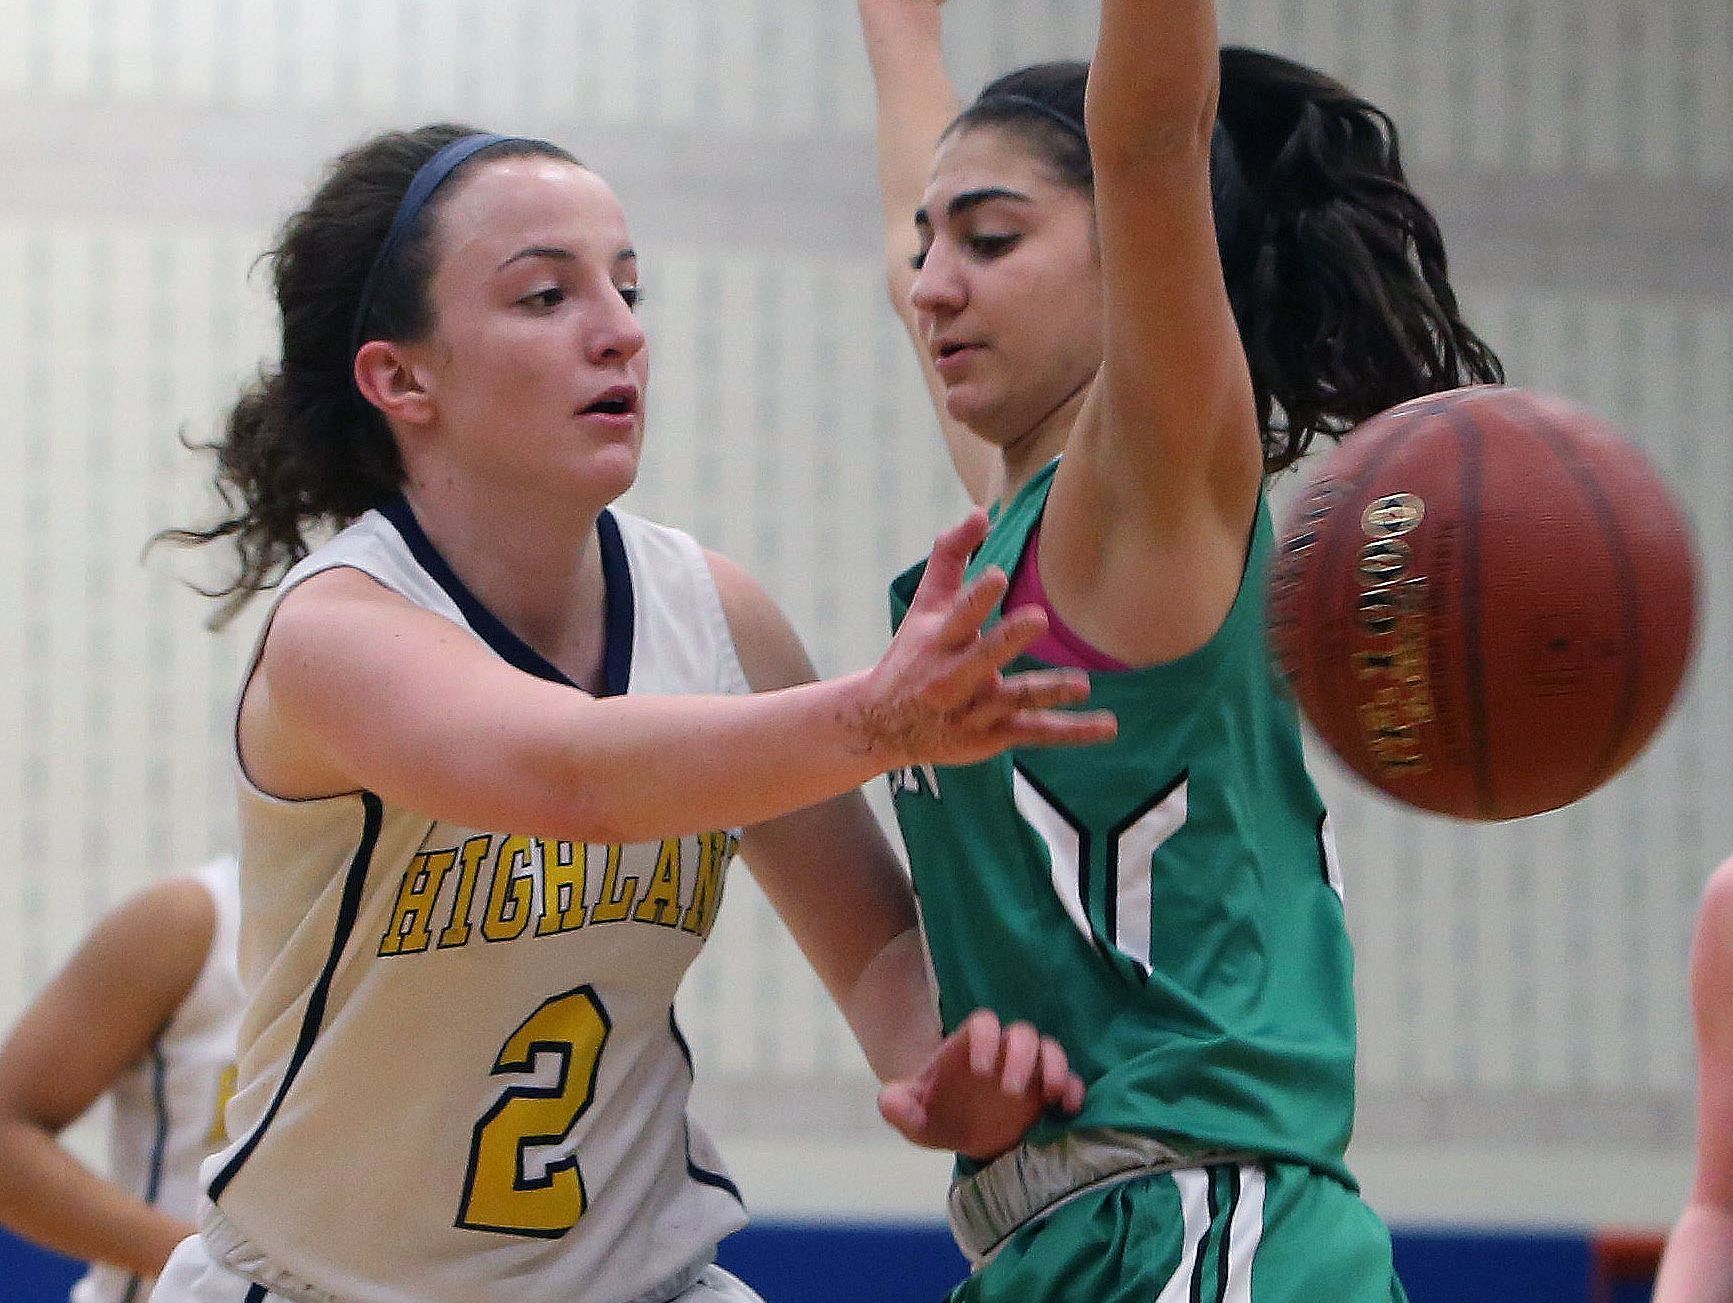 Highland's Brianna Rozzi (2) passes around Irvington's Olivia Valdes (2) during the state regional semifinal at SUNY New Paltz March 7, 2017. Irvington won the game 53-38.